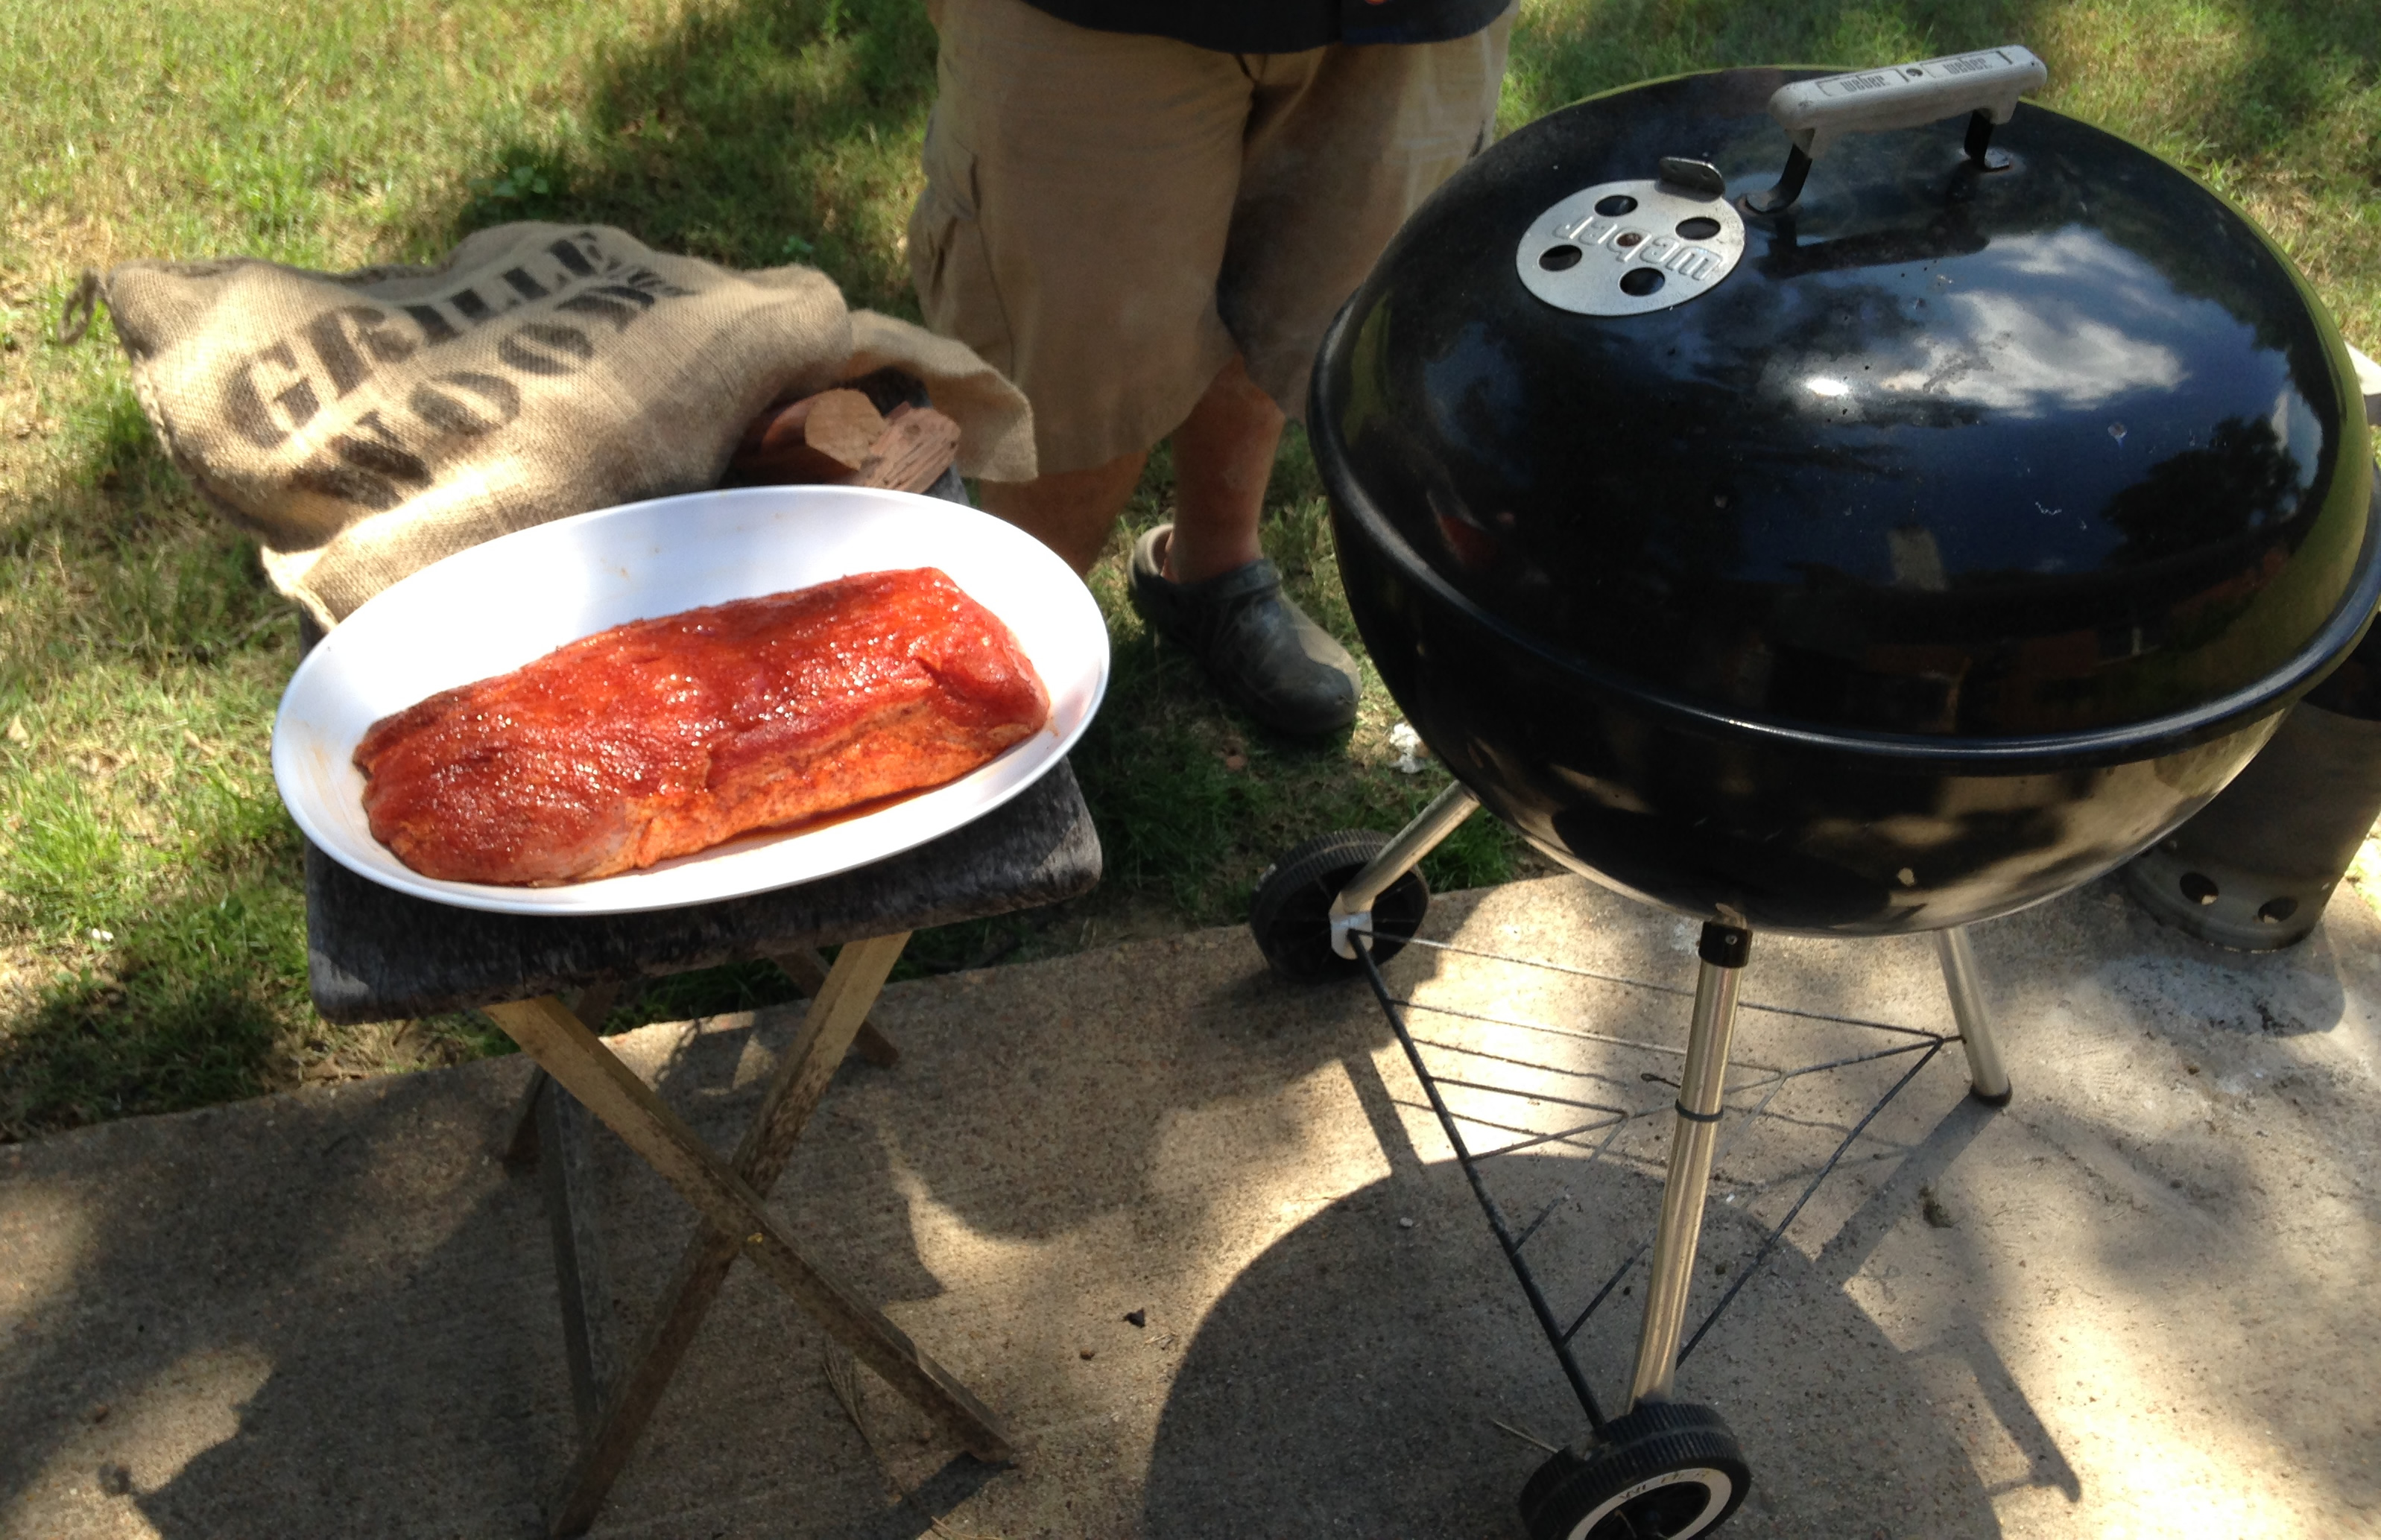 How To BBQ Right added a new photo. - How To BBQ Right